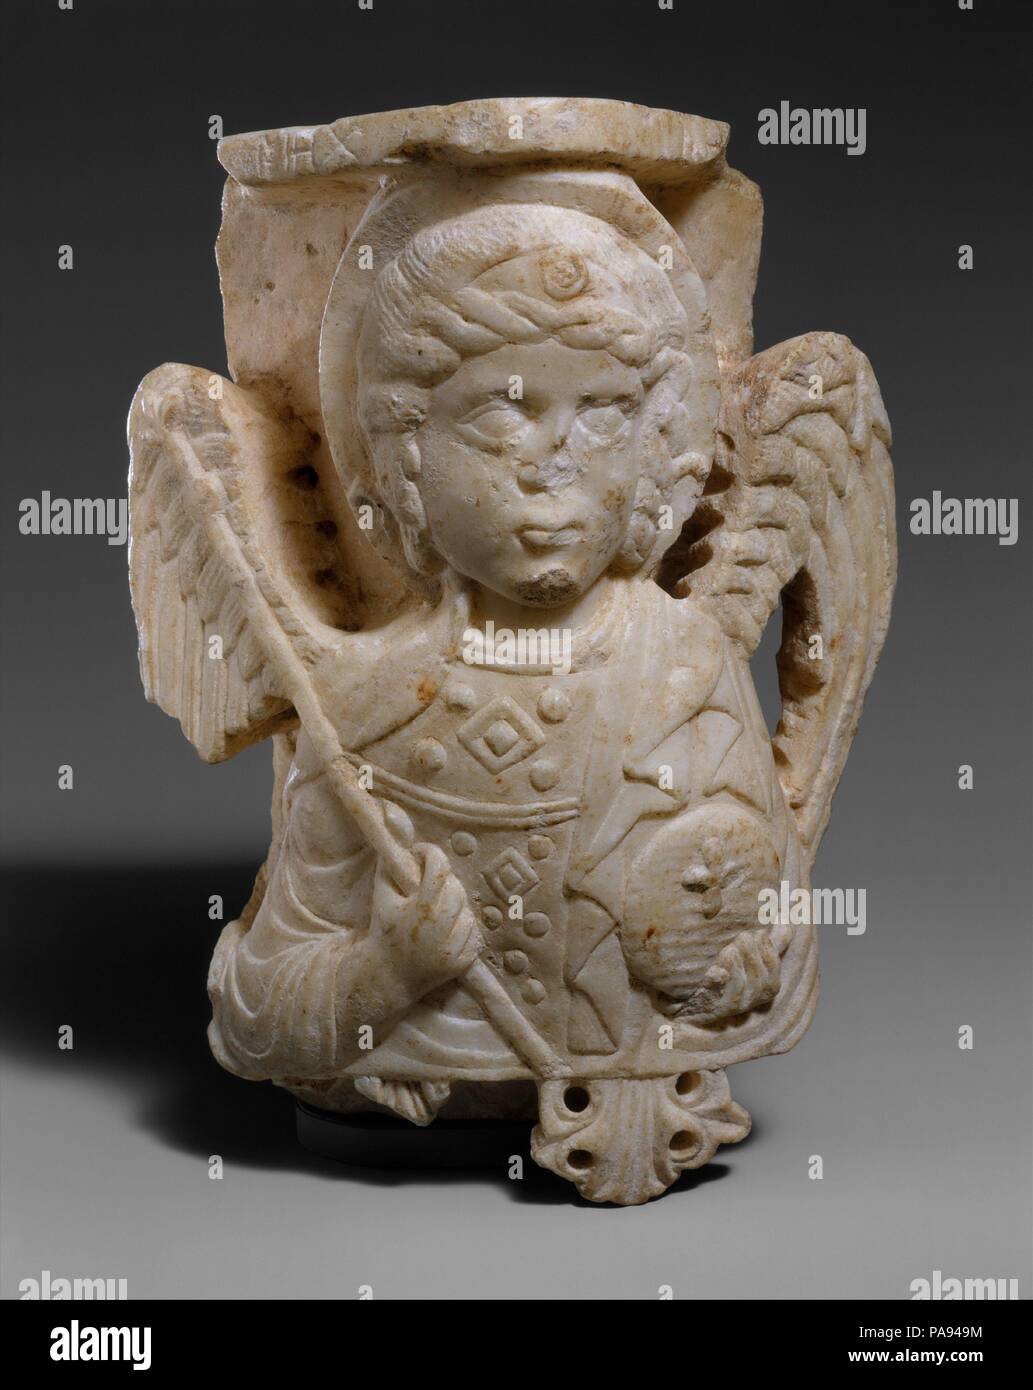 Capital with Bust of the Archangel Michael. Culture: Byzantine. Dimensions: Overall: 10 x 6 3/4 x 4 3/16 in. (25.4 x 17.1 x 10.6 cm). Date: 1250-1300.  This beautifully carved fragment was once part of the interior architecture of a church, perhaps placed at the top of a tomb niche or altar screen. Archangels were often portrayed, as here, in the ceremonial dress of the Byzantine emperor, the head of Christ's earthly court. Museum: Metropolitan Museum of Art, New York, USA. Stock Photo